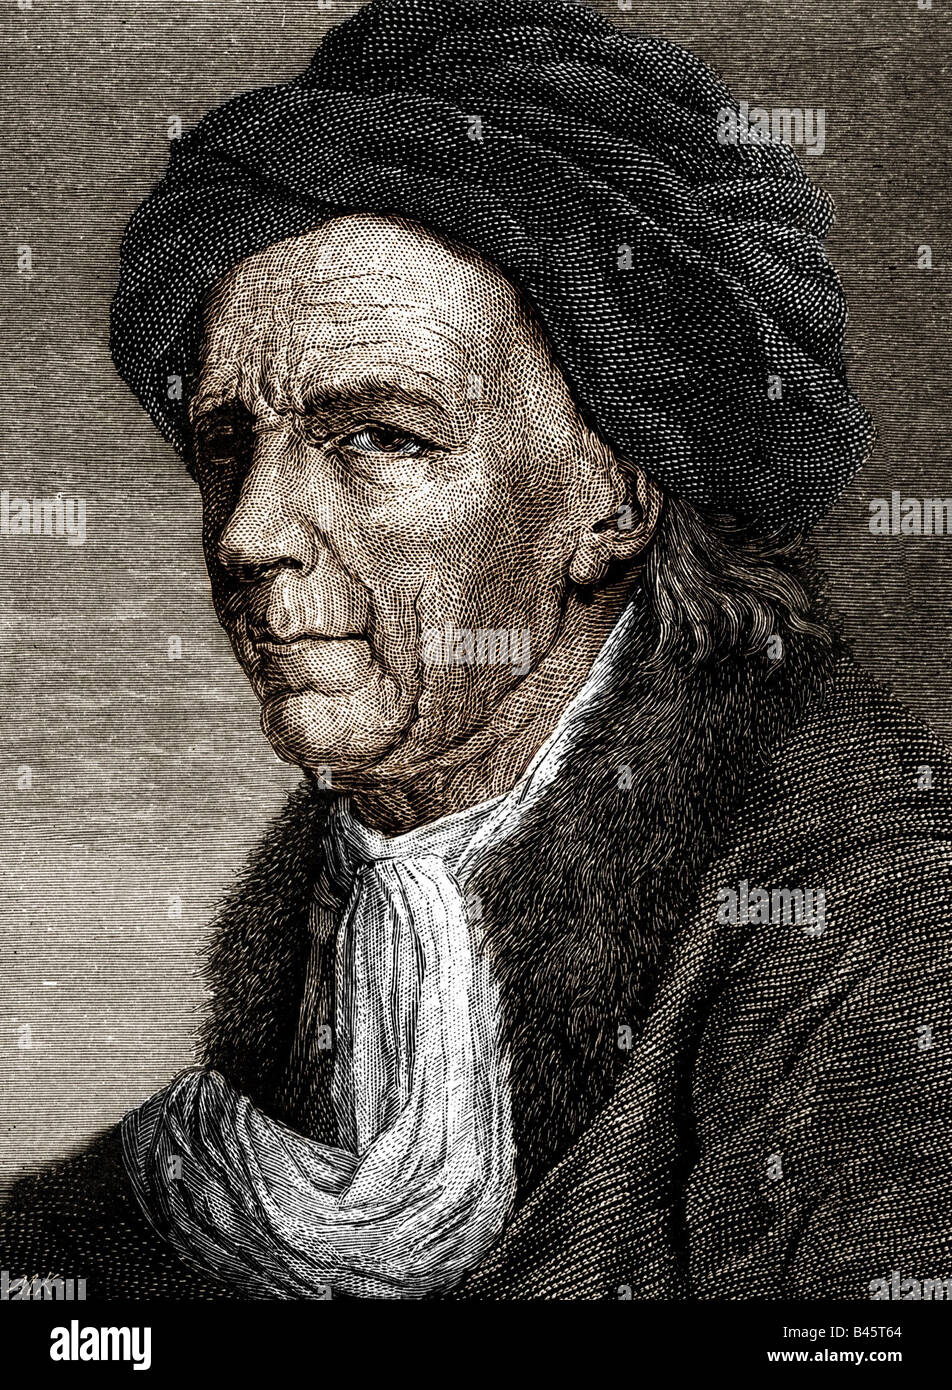 Euler, Leonhard, 15.4.1707 - 7.9.1783, Swiss mathematician and physicist, portrait, engraving after painting by J. Darbes, 1778, Artist's Copyright has not to be cleared Stock Photo